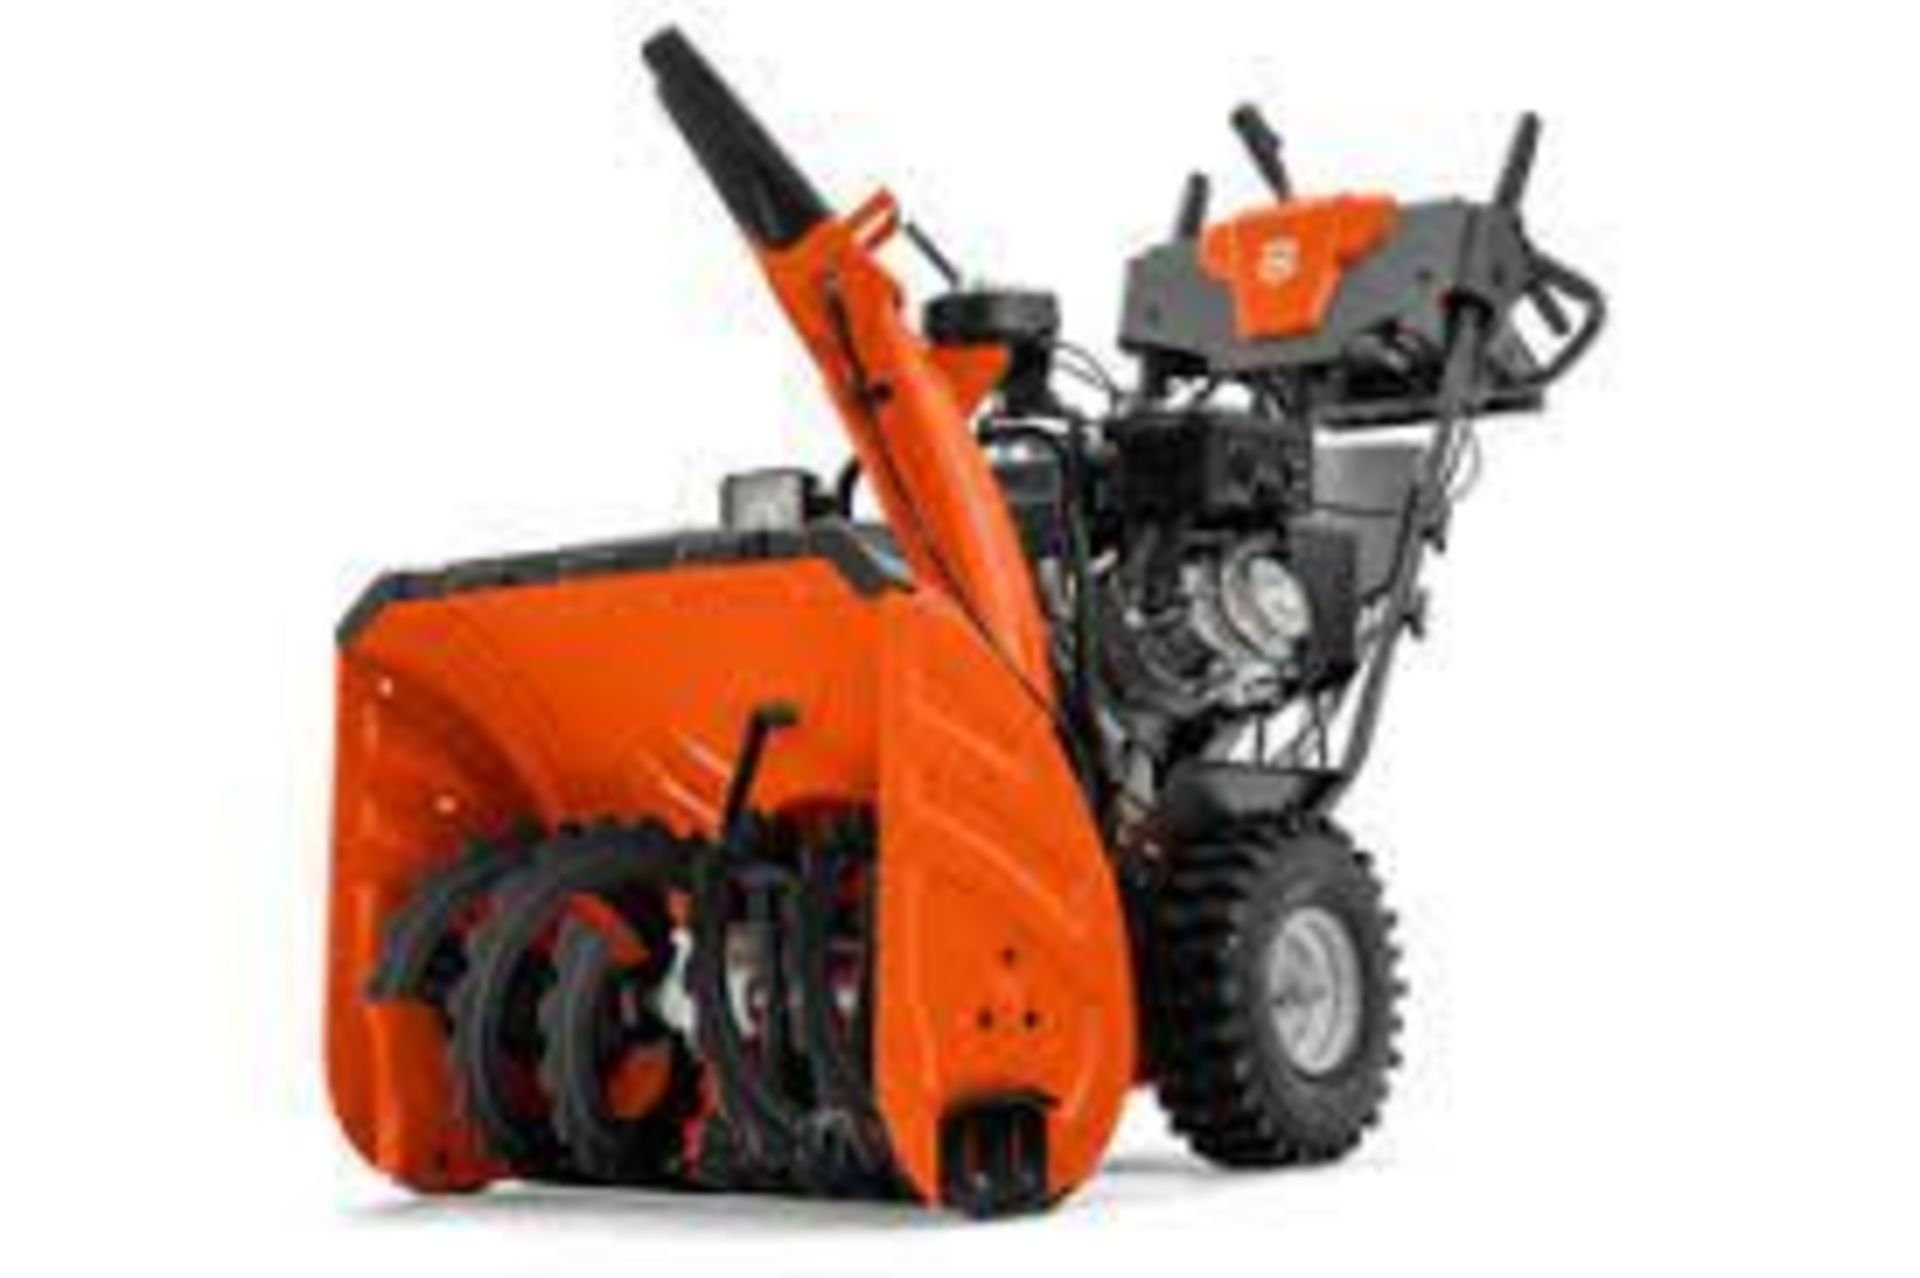 Husqvarna ST 424 Self Propelled Snow Blower - Approx. MSRP $2299 - Image 2 of 5